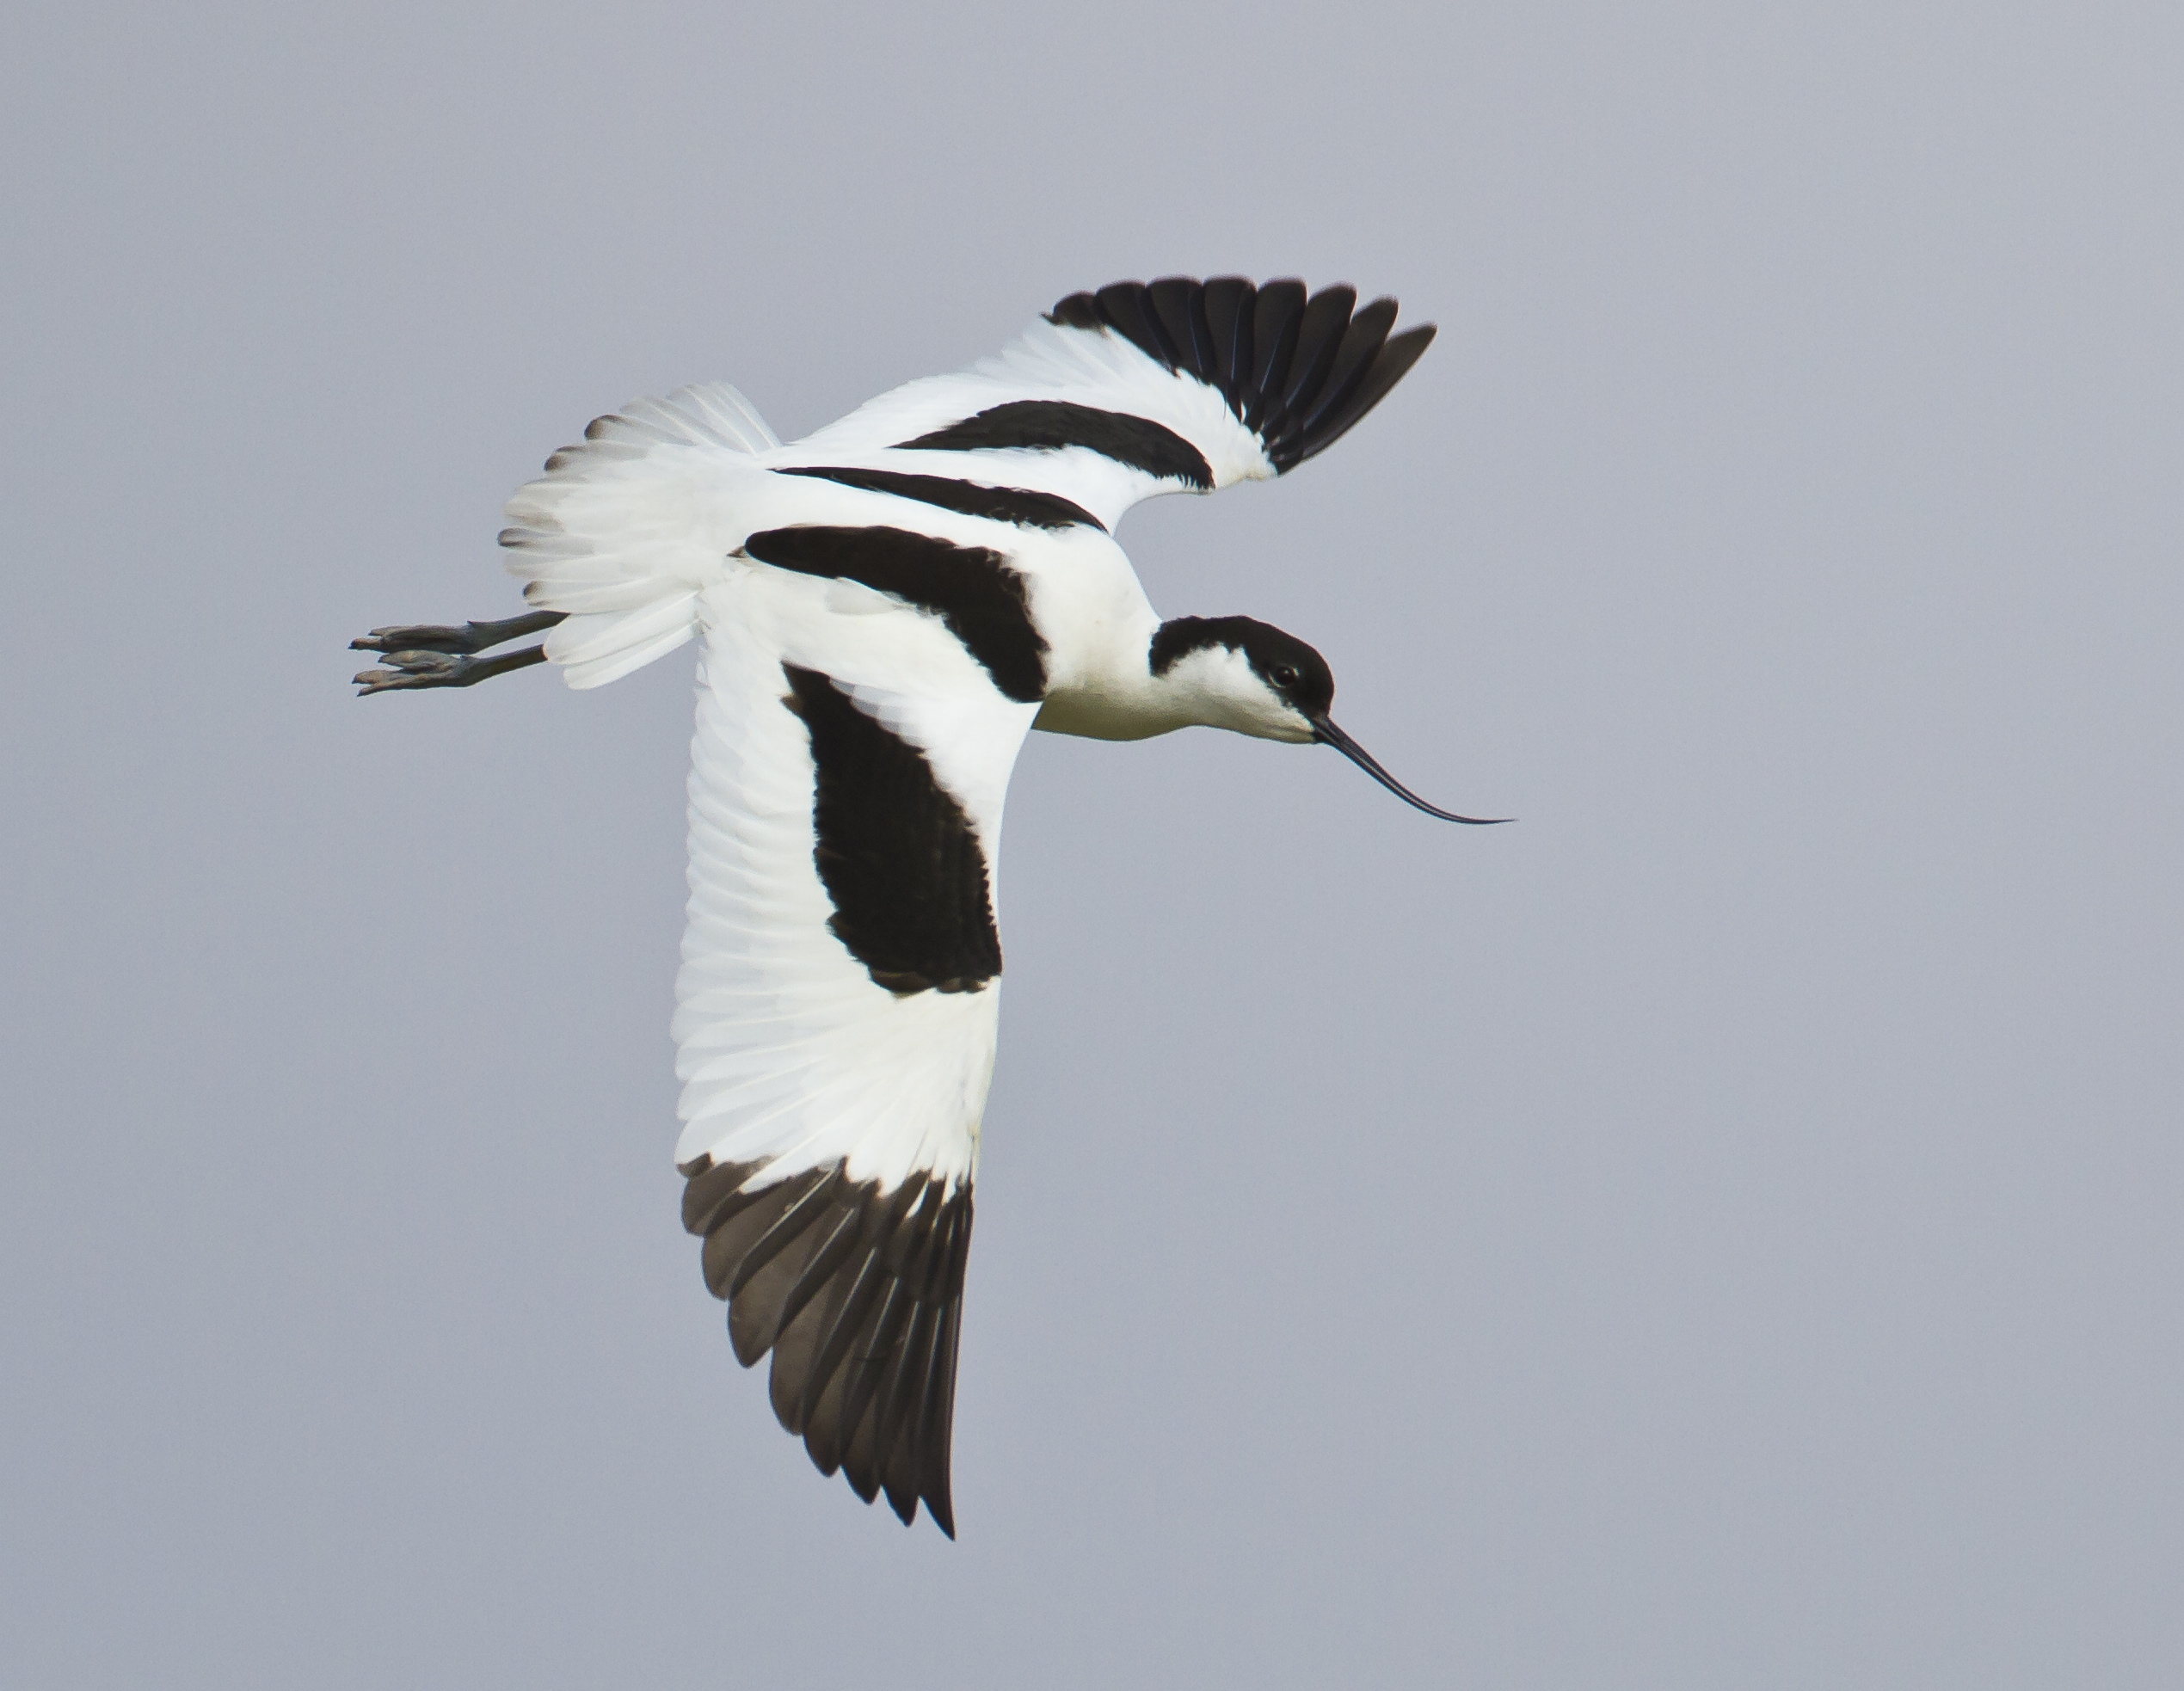 The avocet is the symbol of the RSPB, which welcomed the designations (Natural England/PA)